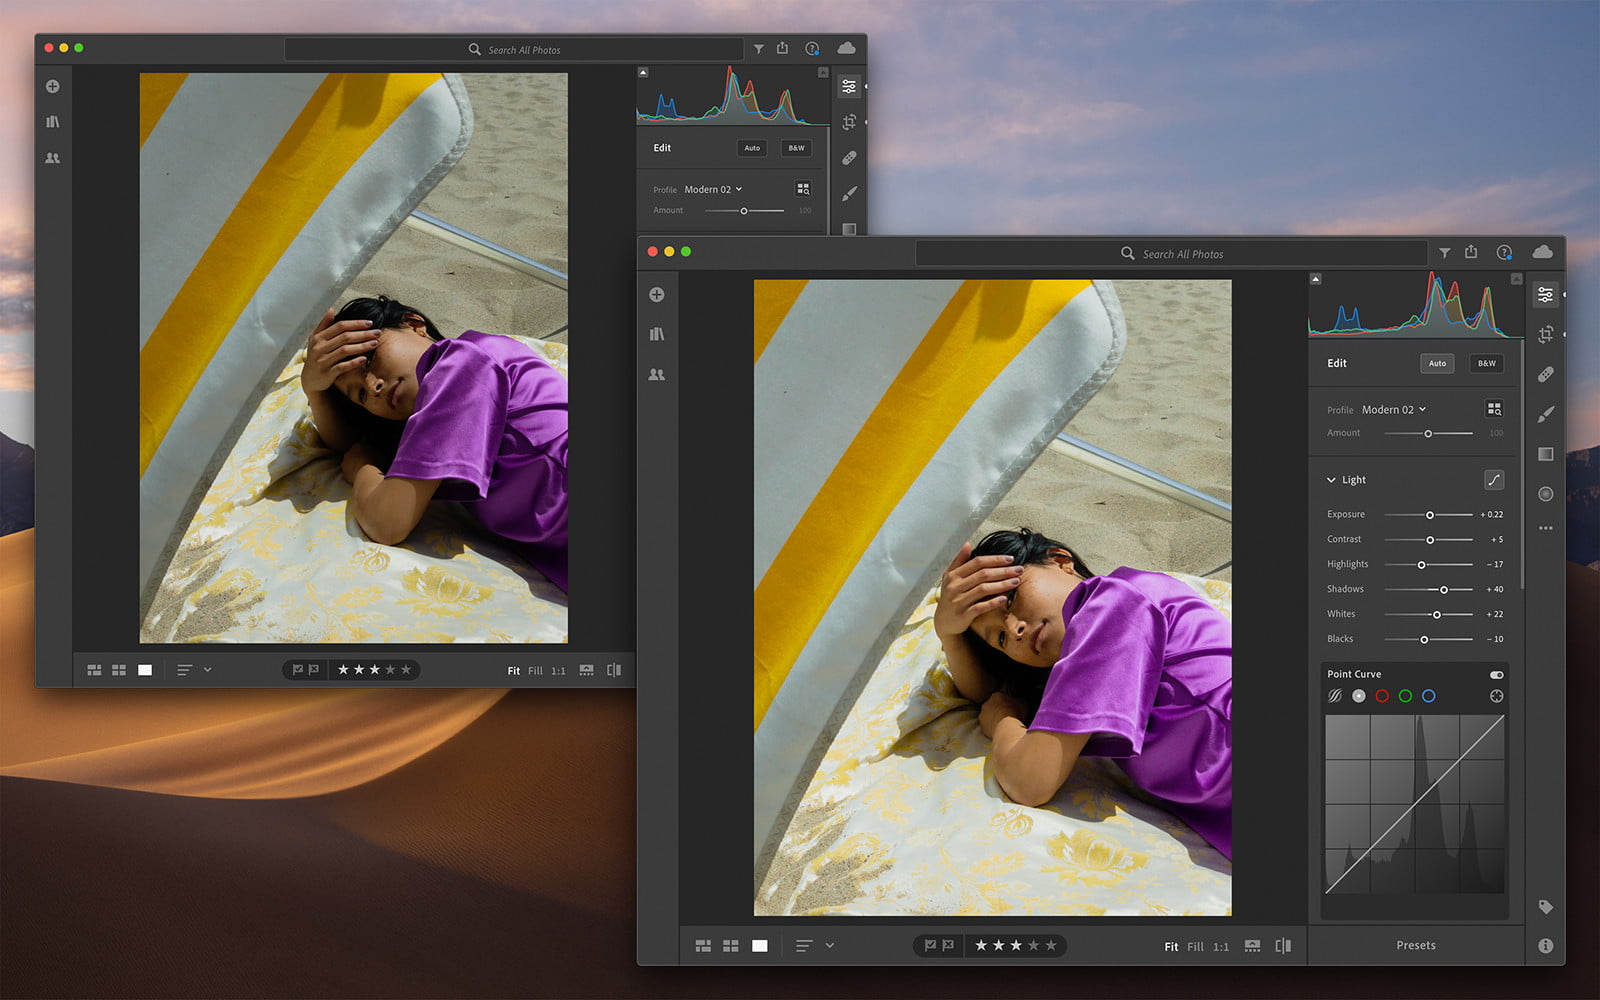 best programs from adobe for photo editing on mac